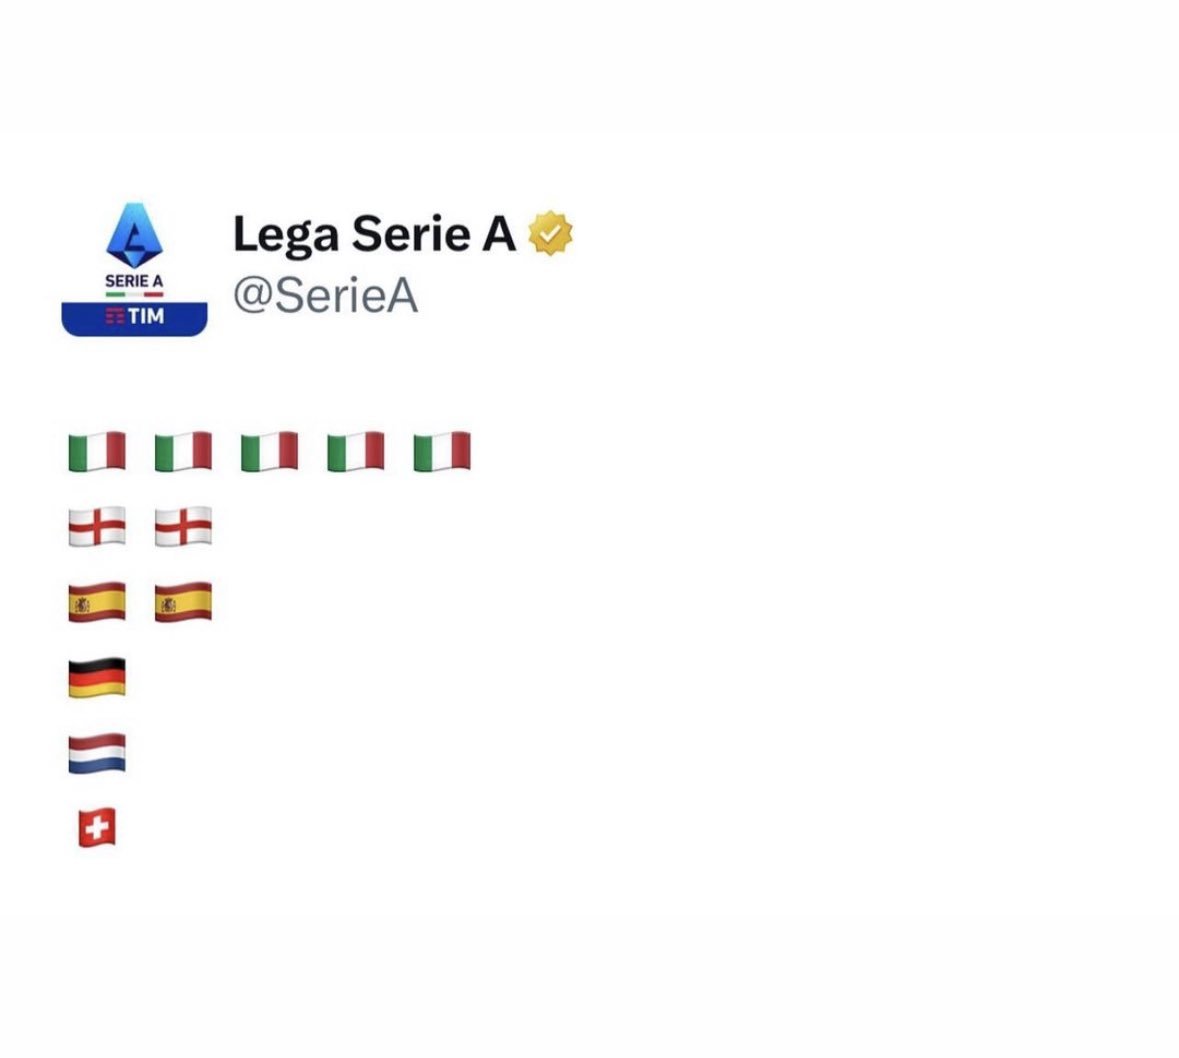 The teams ranked for the semi-finals of European competitions.